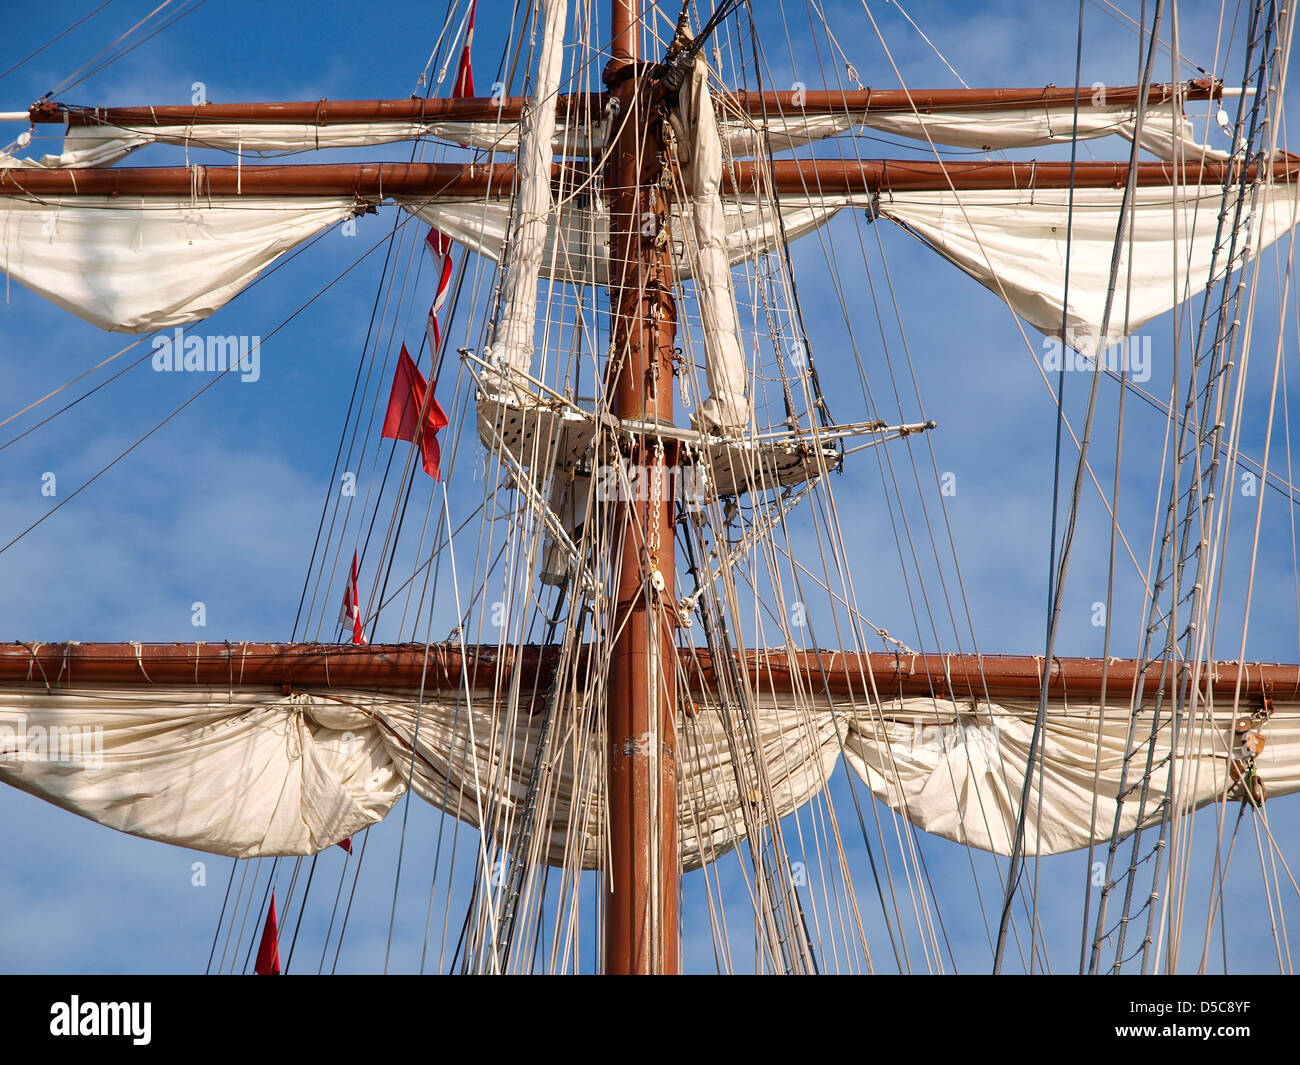 Mast of a ship with furled sails detail Stock Photo - Alamy